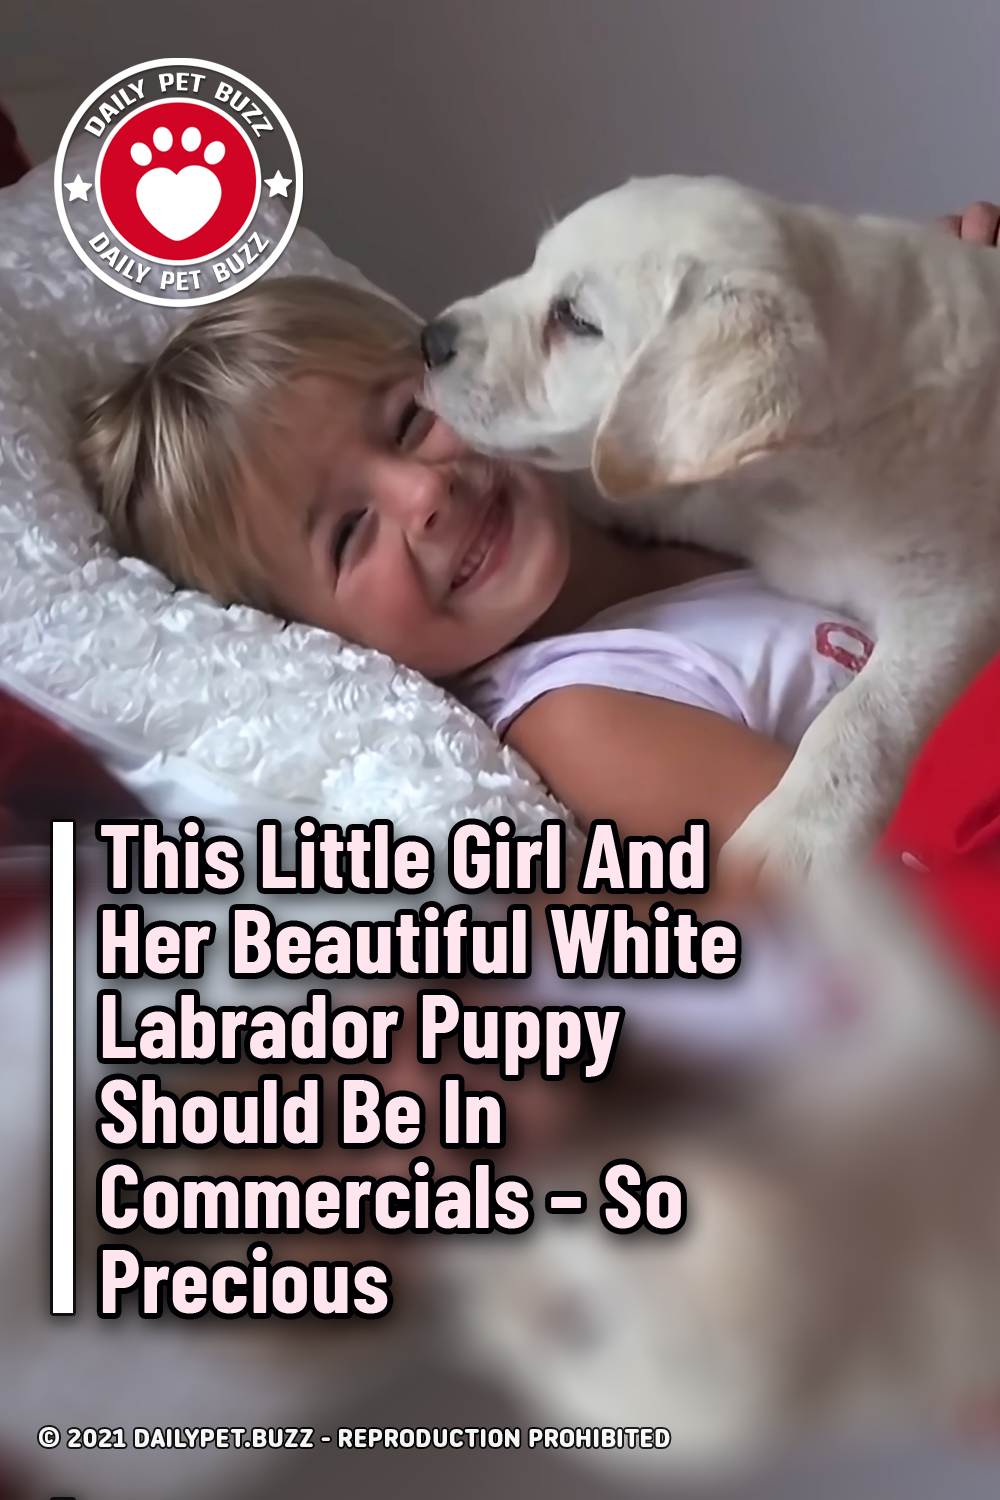 This Little Girl And Her Beautiful White Labrador Puppy Should Be In Commercials – So Precious